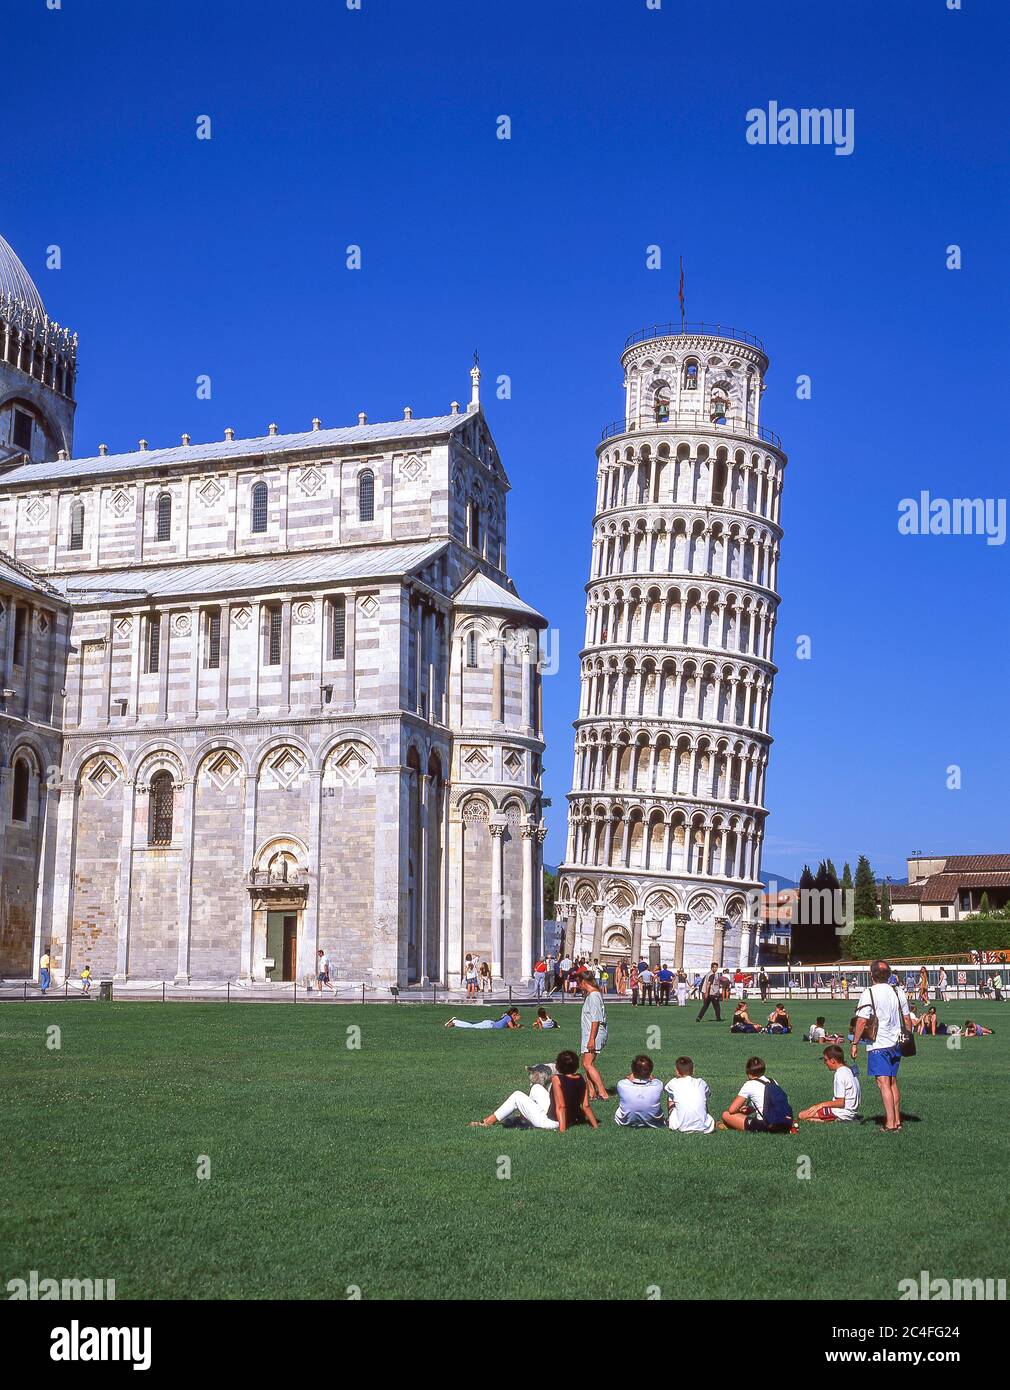 The Leaning Tower (Torre pendente di Pisa) and Cathedral (Duomo), Piazza dei Miracoli, Pisa, Tuscany Region, Italy Stock Photo